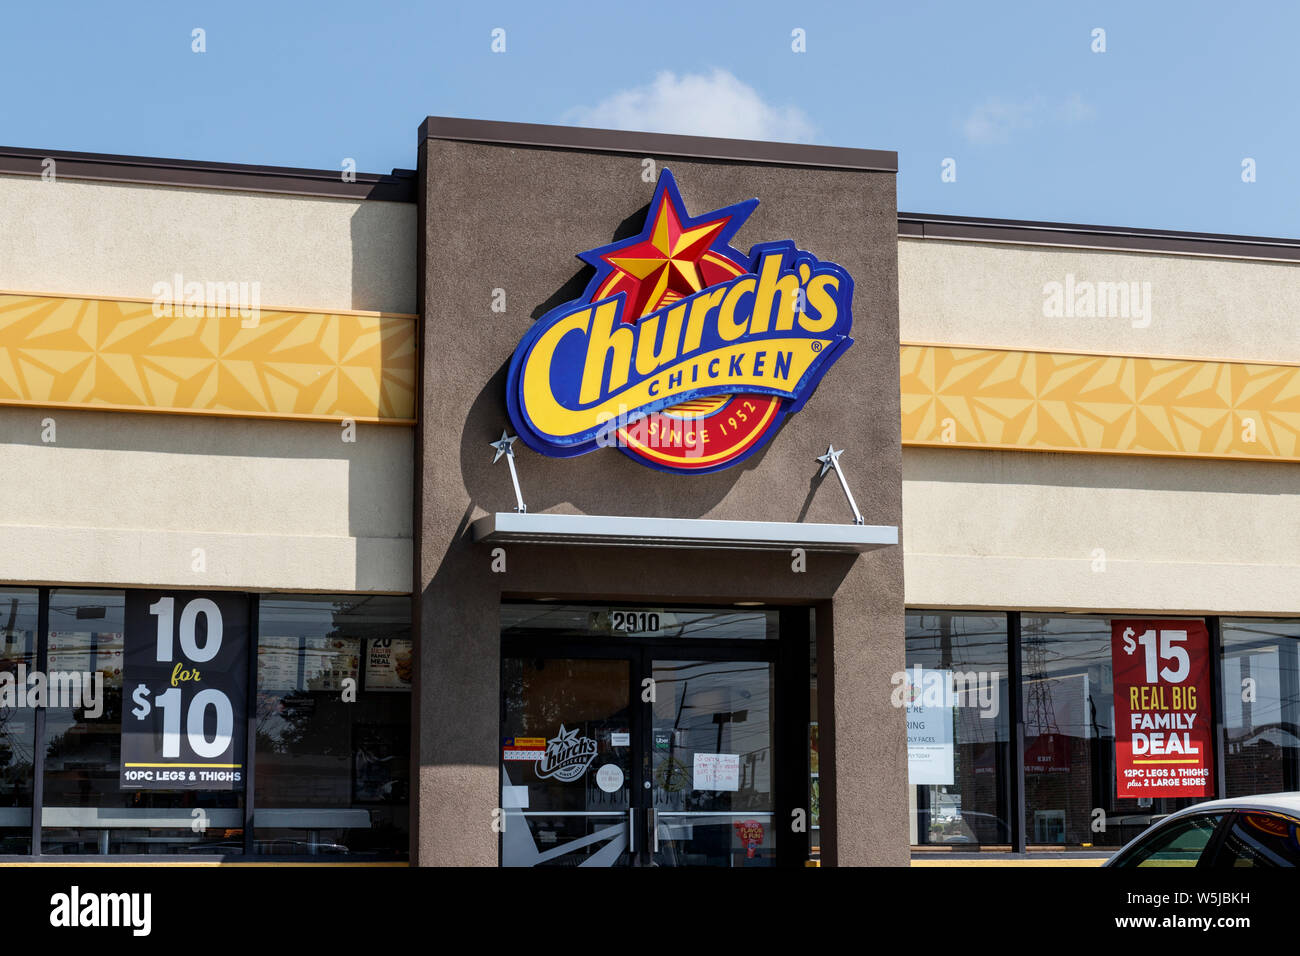 Indianapolis - Circa July 2019: Church's Chicken fast food restaurant. Church's Chicken has been serving fried chicken since 1952 I Stock Photo